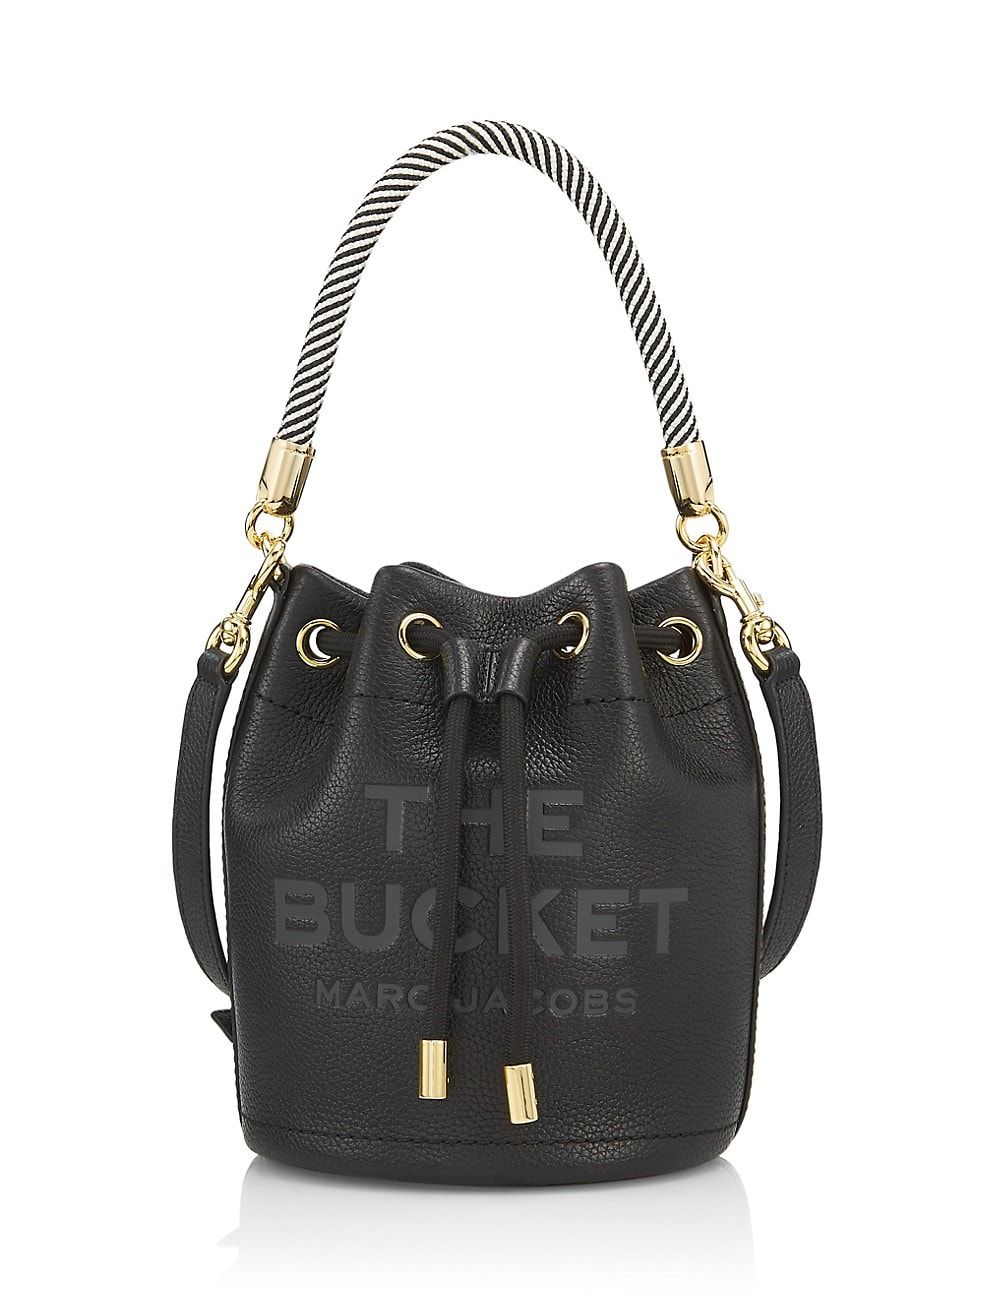 The Leather Bucket Bag | Saks Fifth Avenue